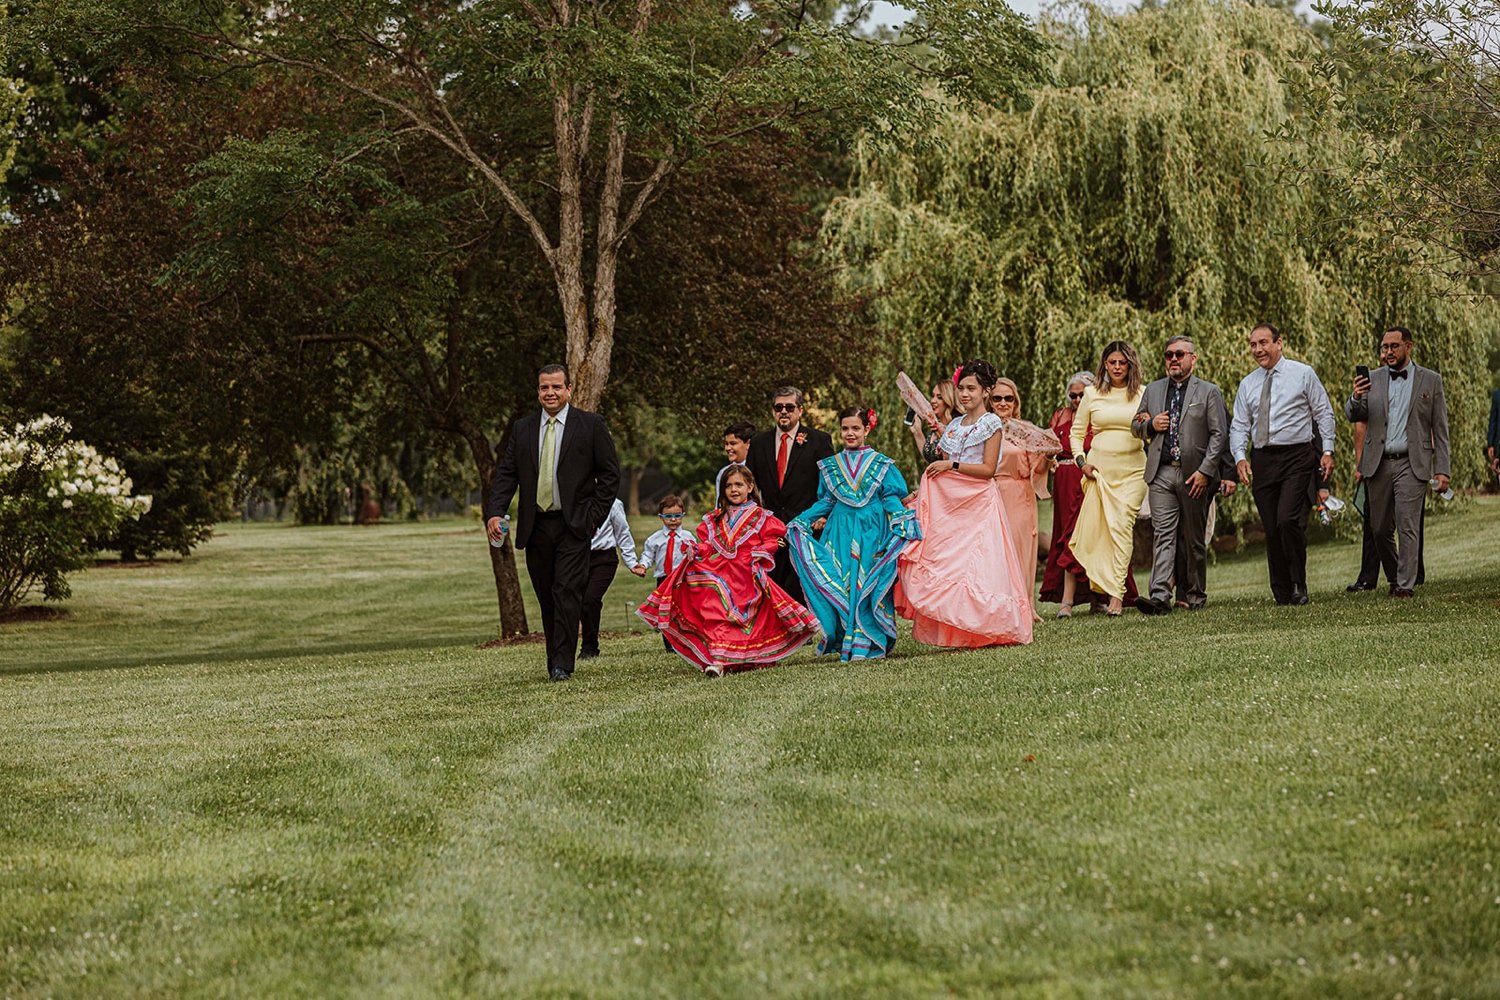 Guests arrive at the multi-cultural wedding